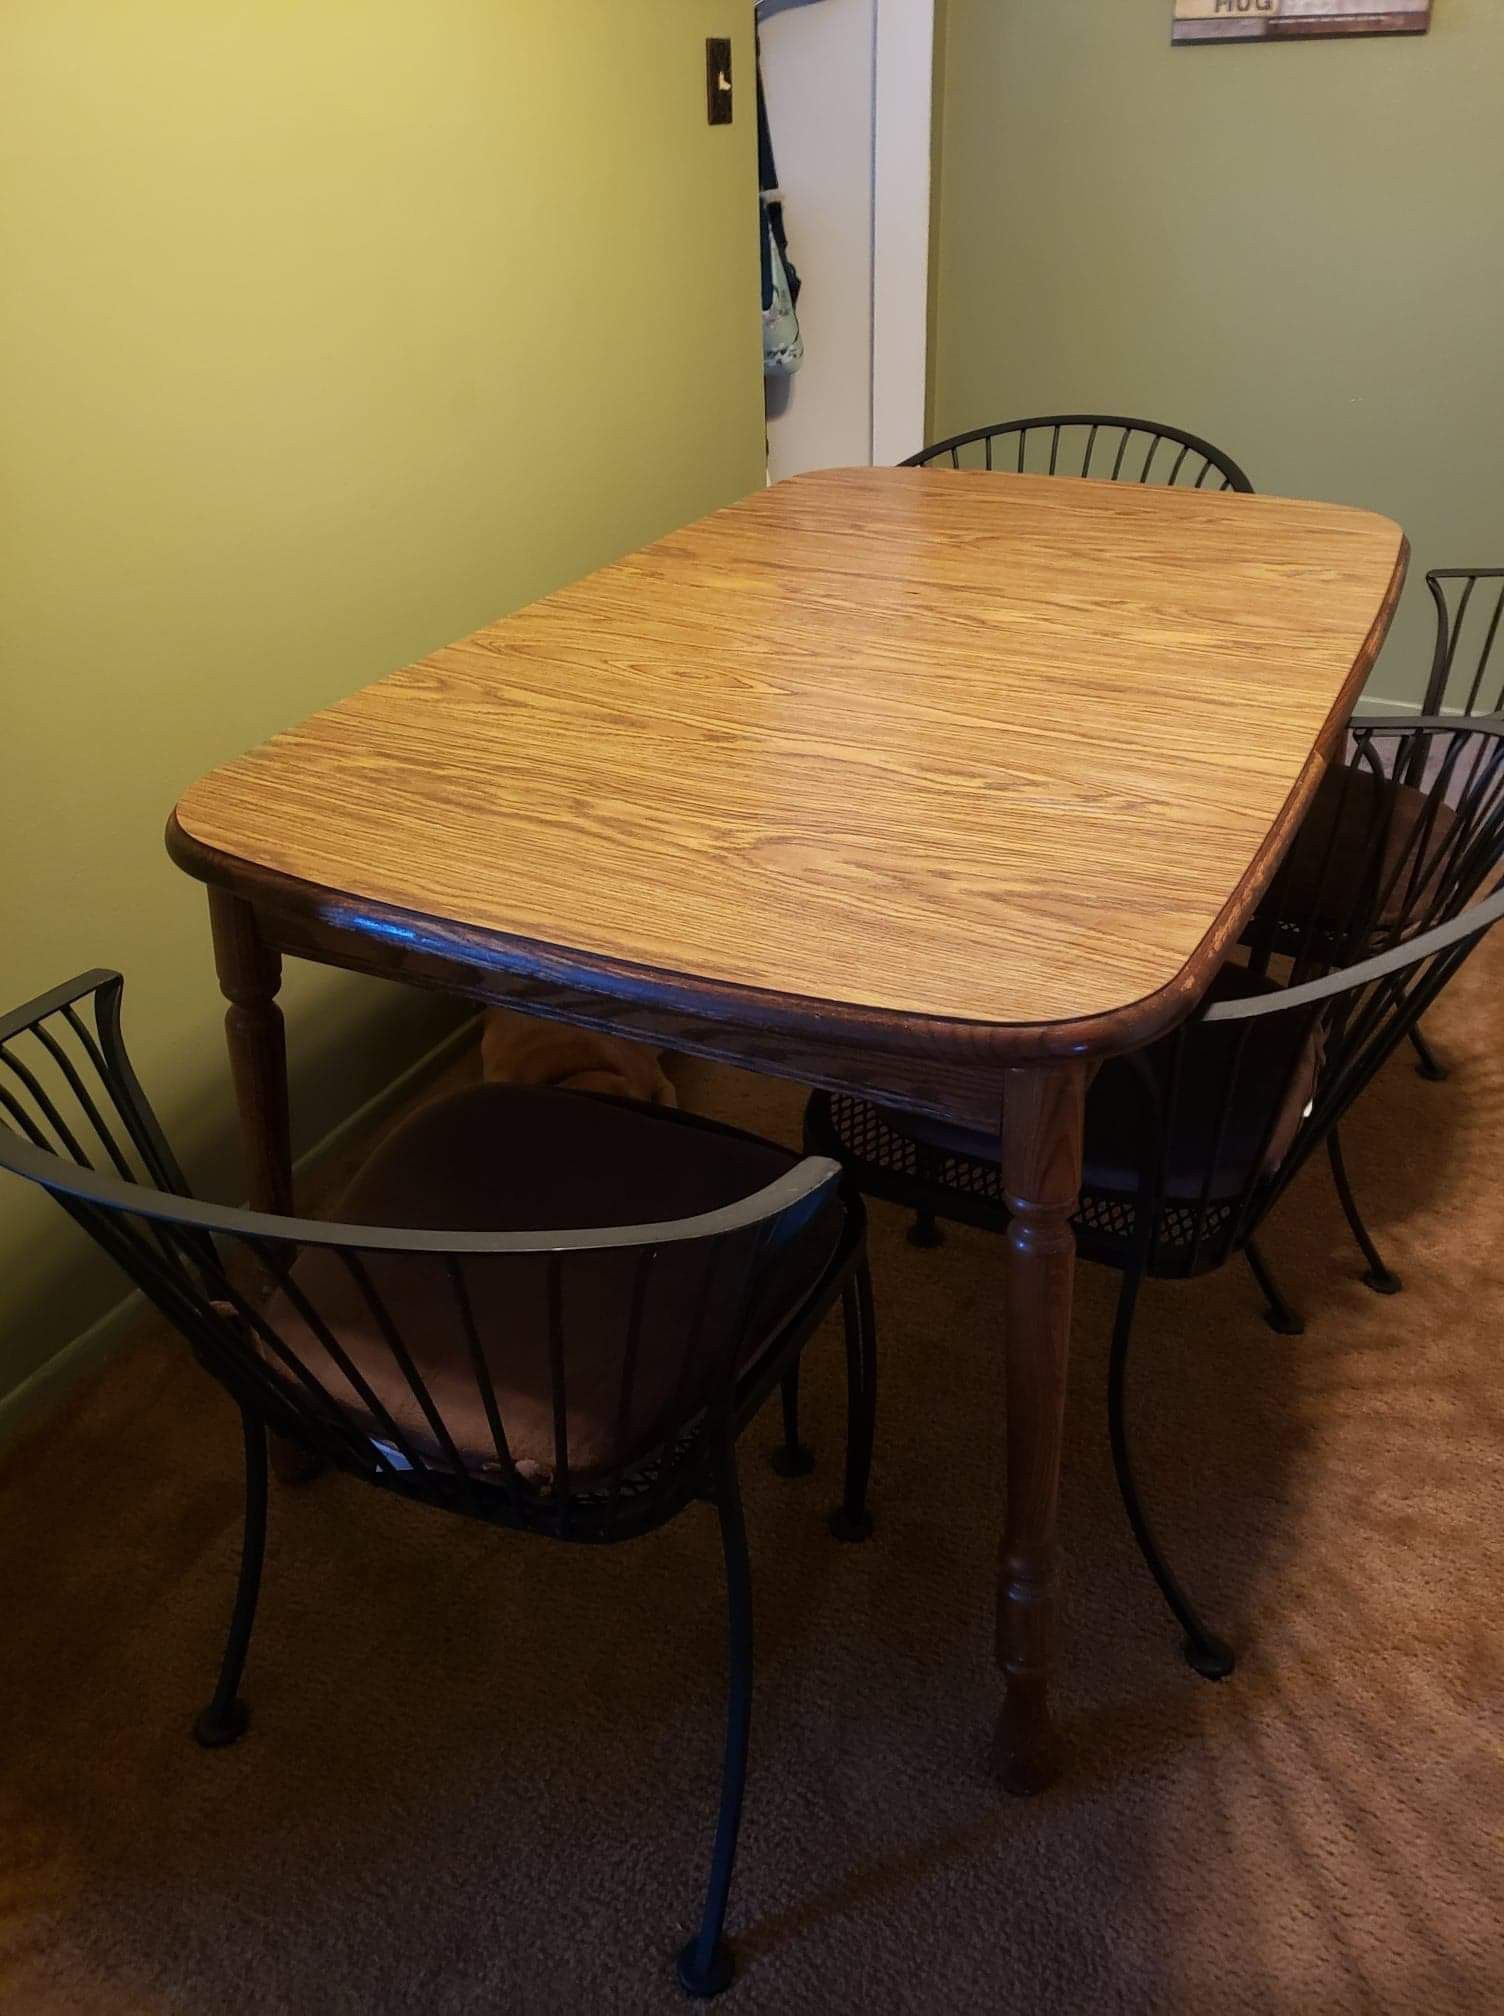 Oak kitchen table set w/4 heavy wrought iron chairs excellent condition table is 57×36 w/1 leaf in